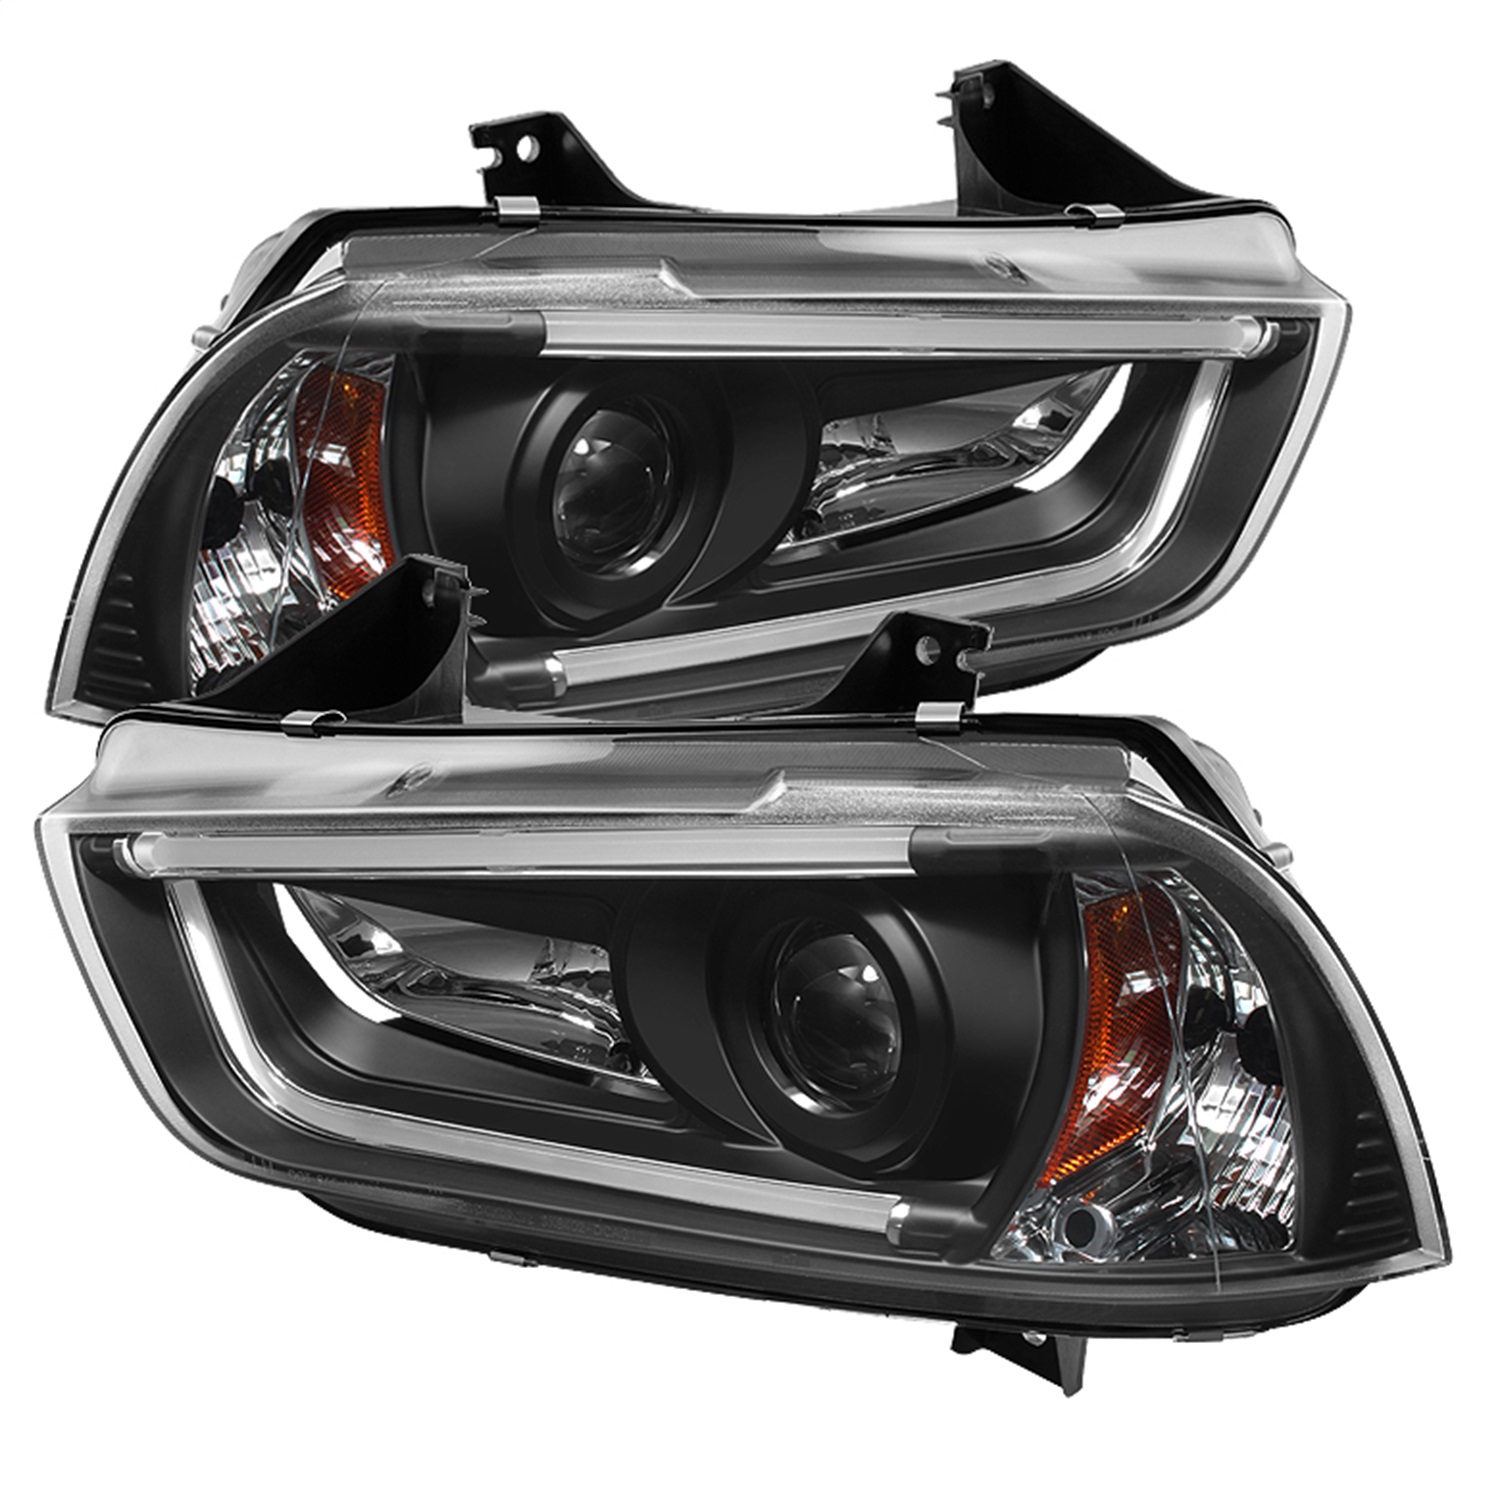 Spyder Auto 5074201 DRL Projector Headlights Fits 11-14 Charger